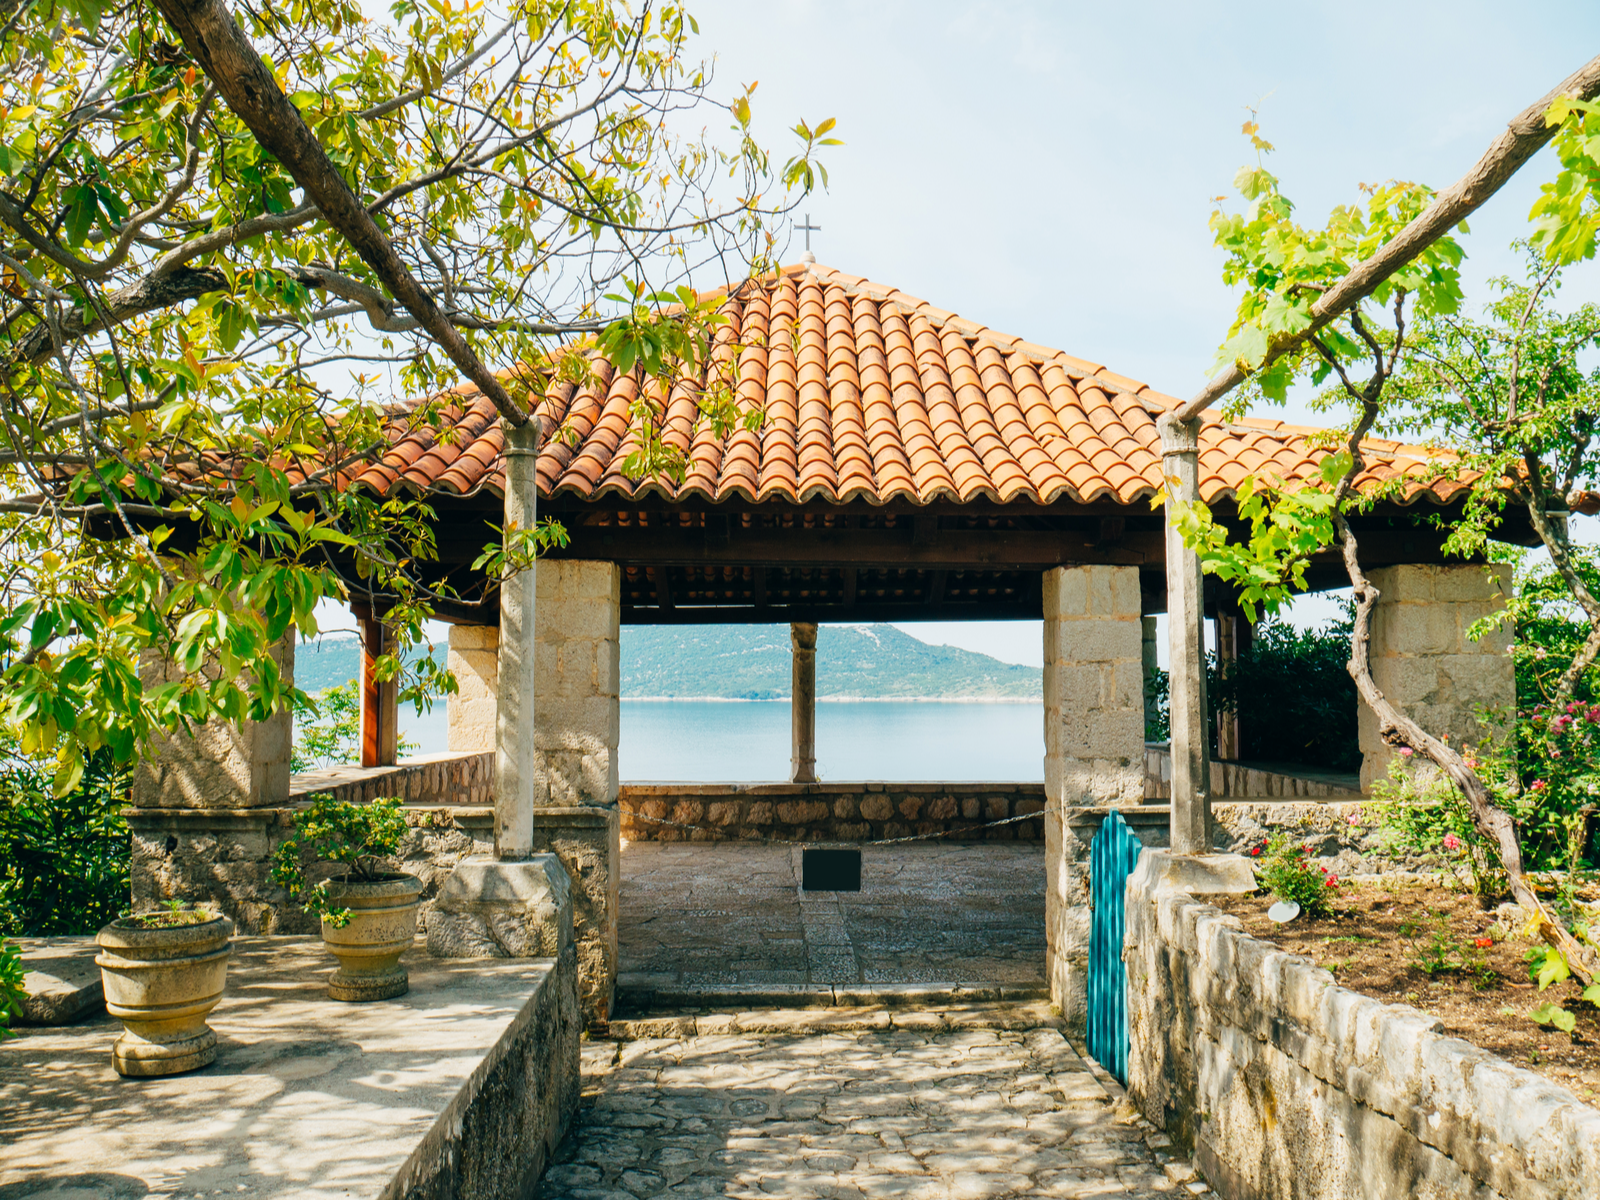 Gazebo with a tiled roof overlooking a calm sea at Trsteno Arboretum in Croatia is one of the Game of Thrones filming locations you can visit in real life